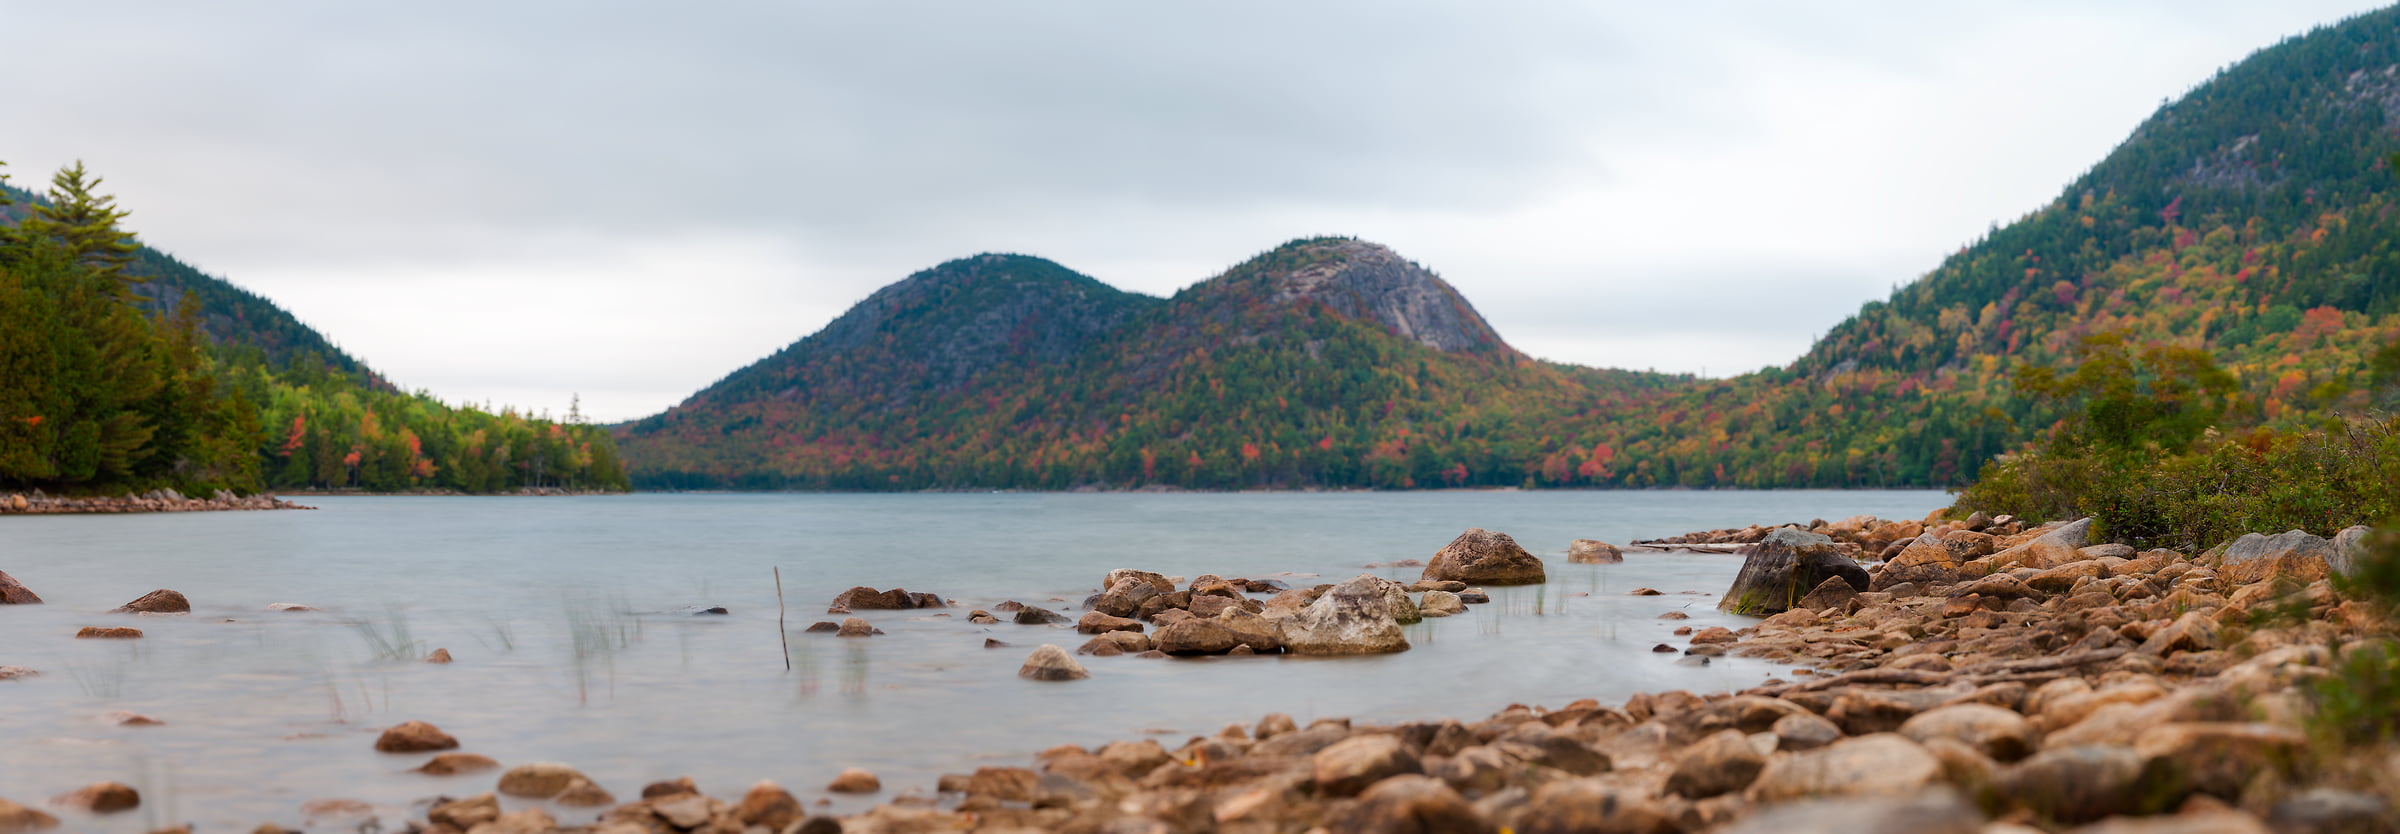 118 megapixels! A very high resolution, large-format VAST photo of Jordan Pond in Acadia National Park; fine art landscape photograph created by Aaron Priest in Maine, New England.